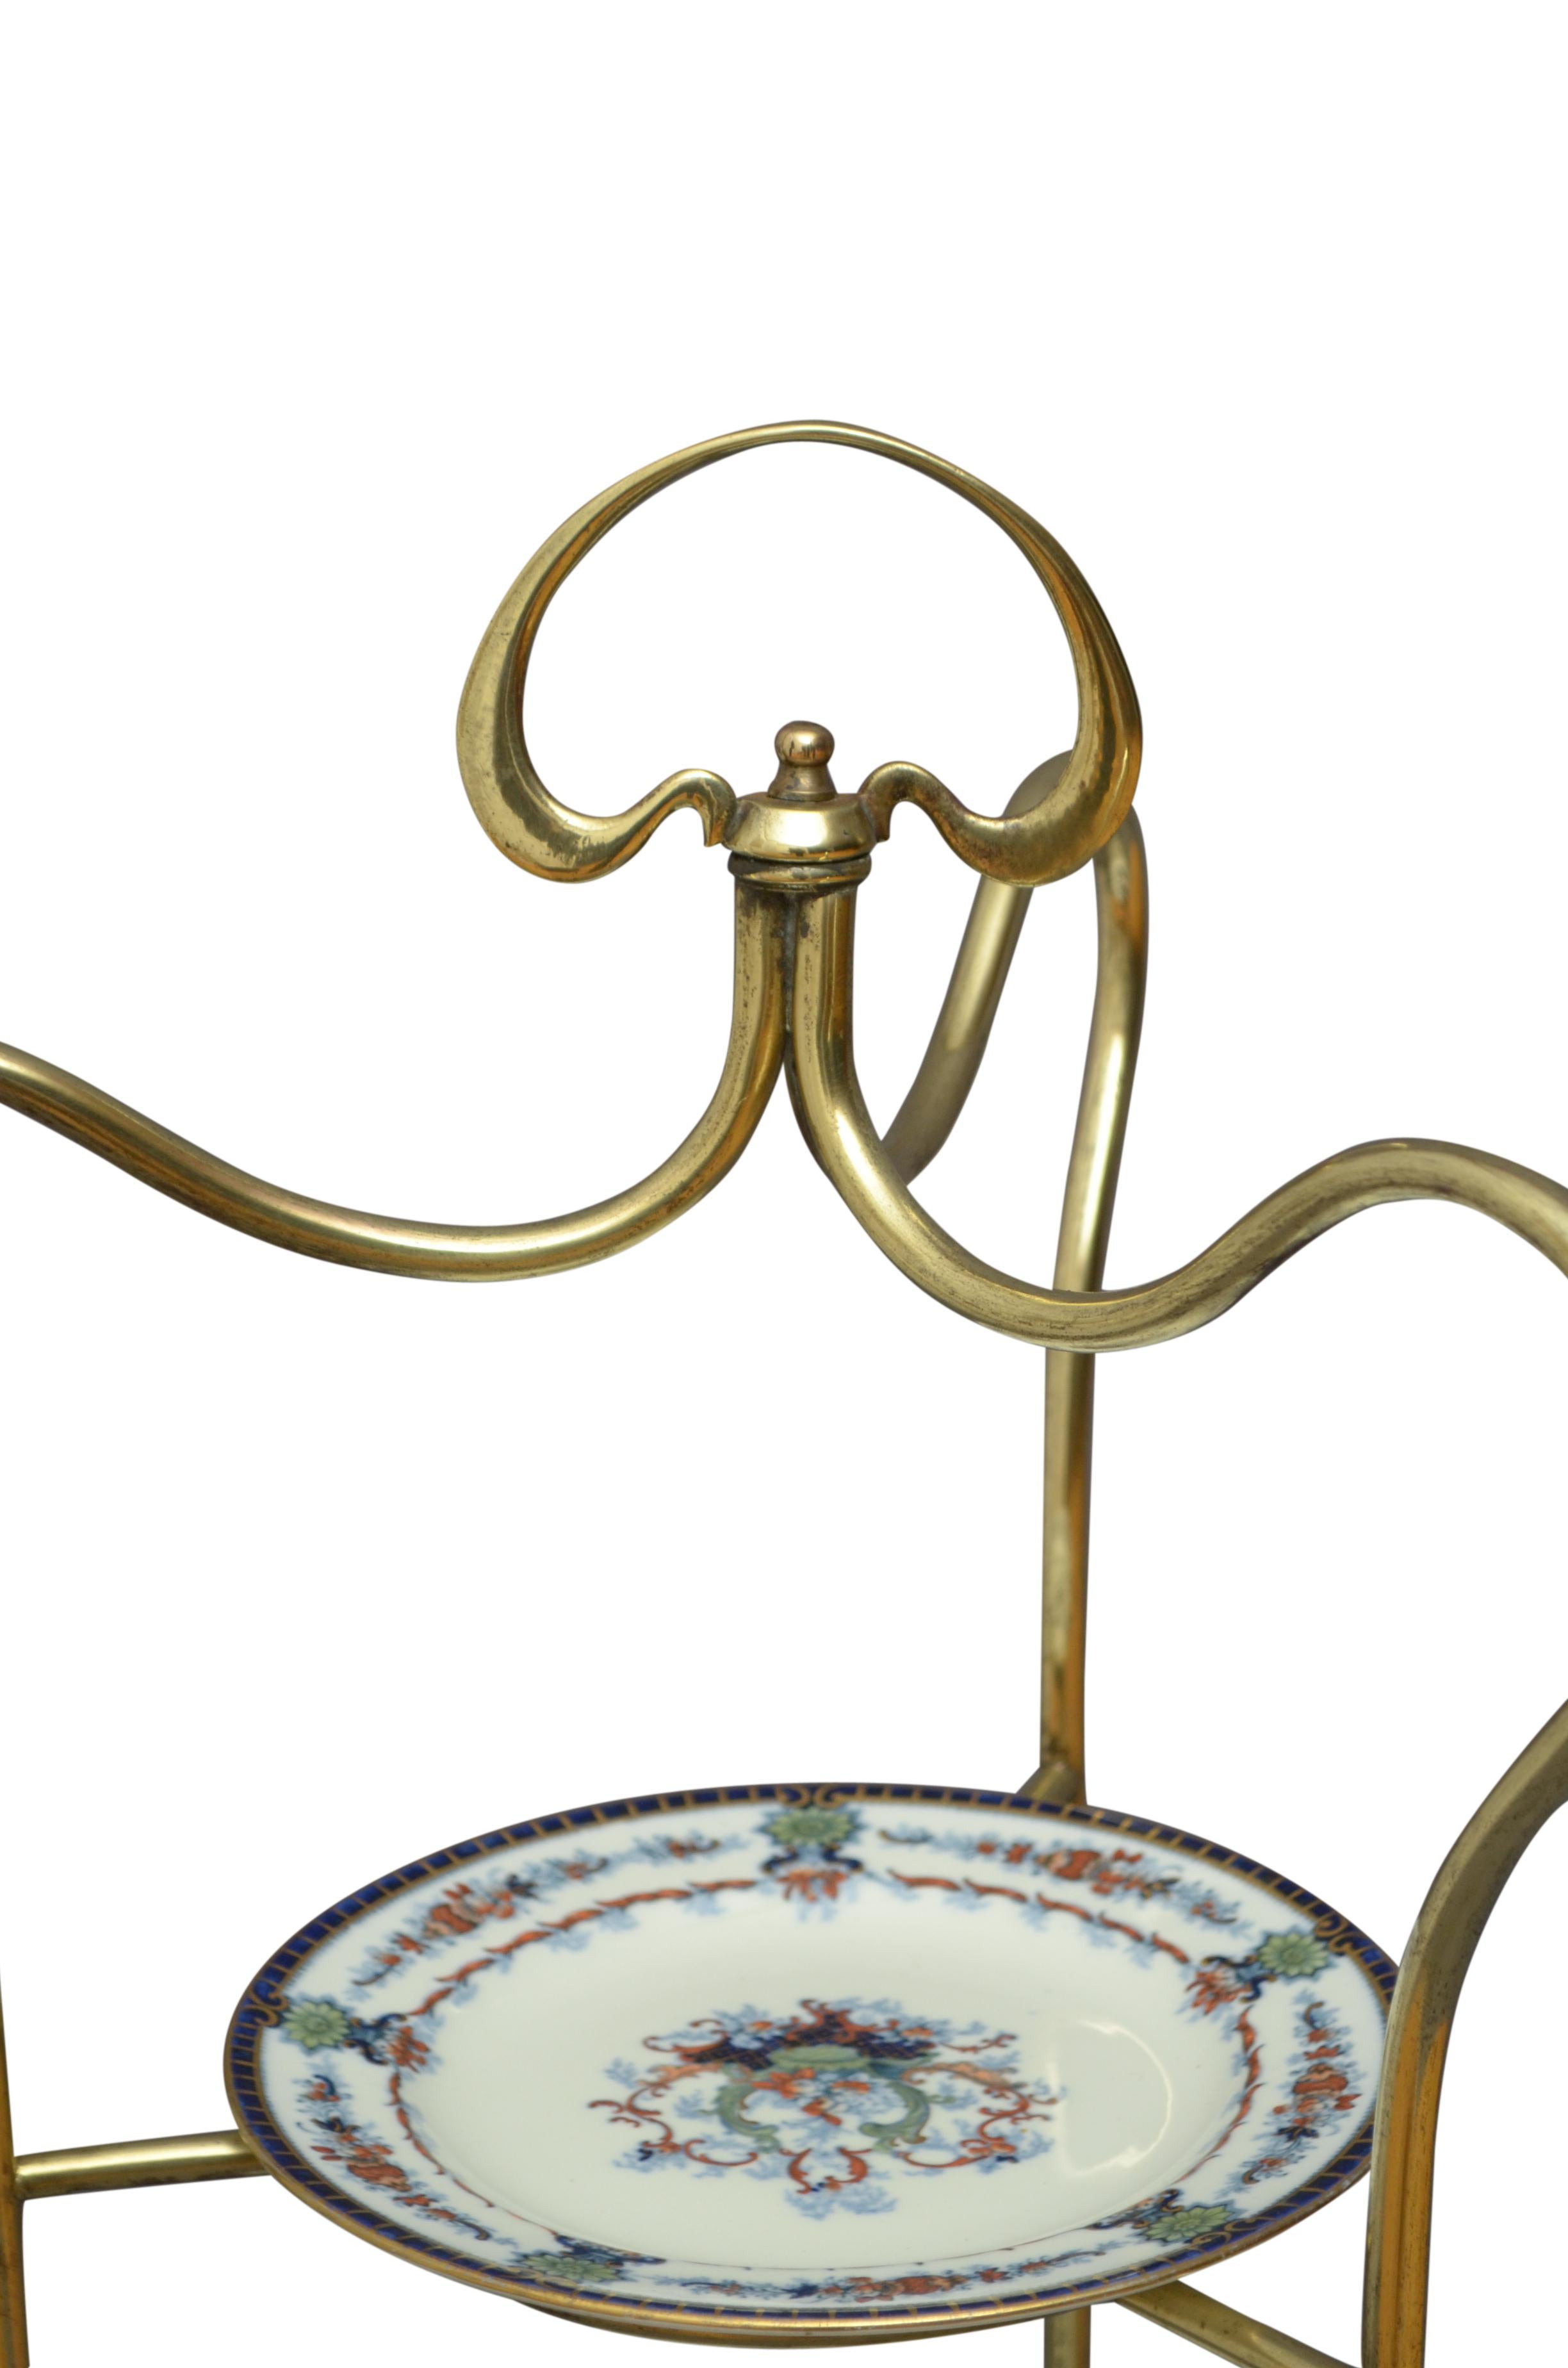 Early 20th Century Art Nouveau Brass Fruit or Cake Stand